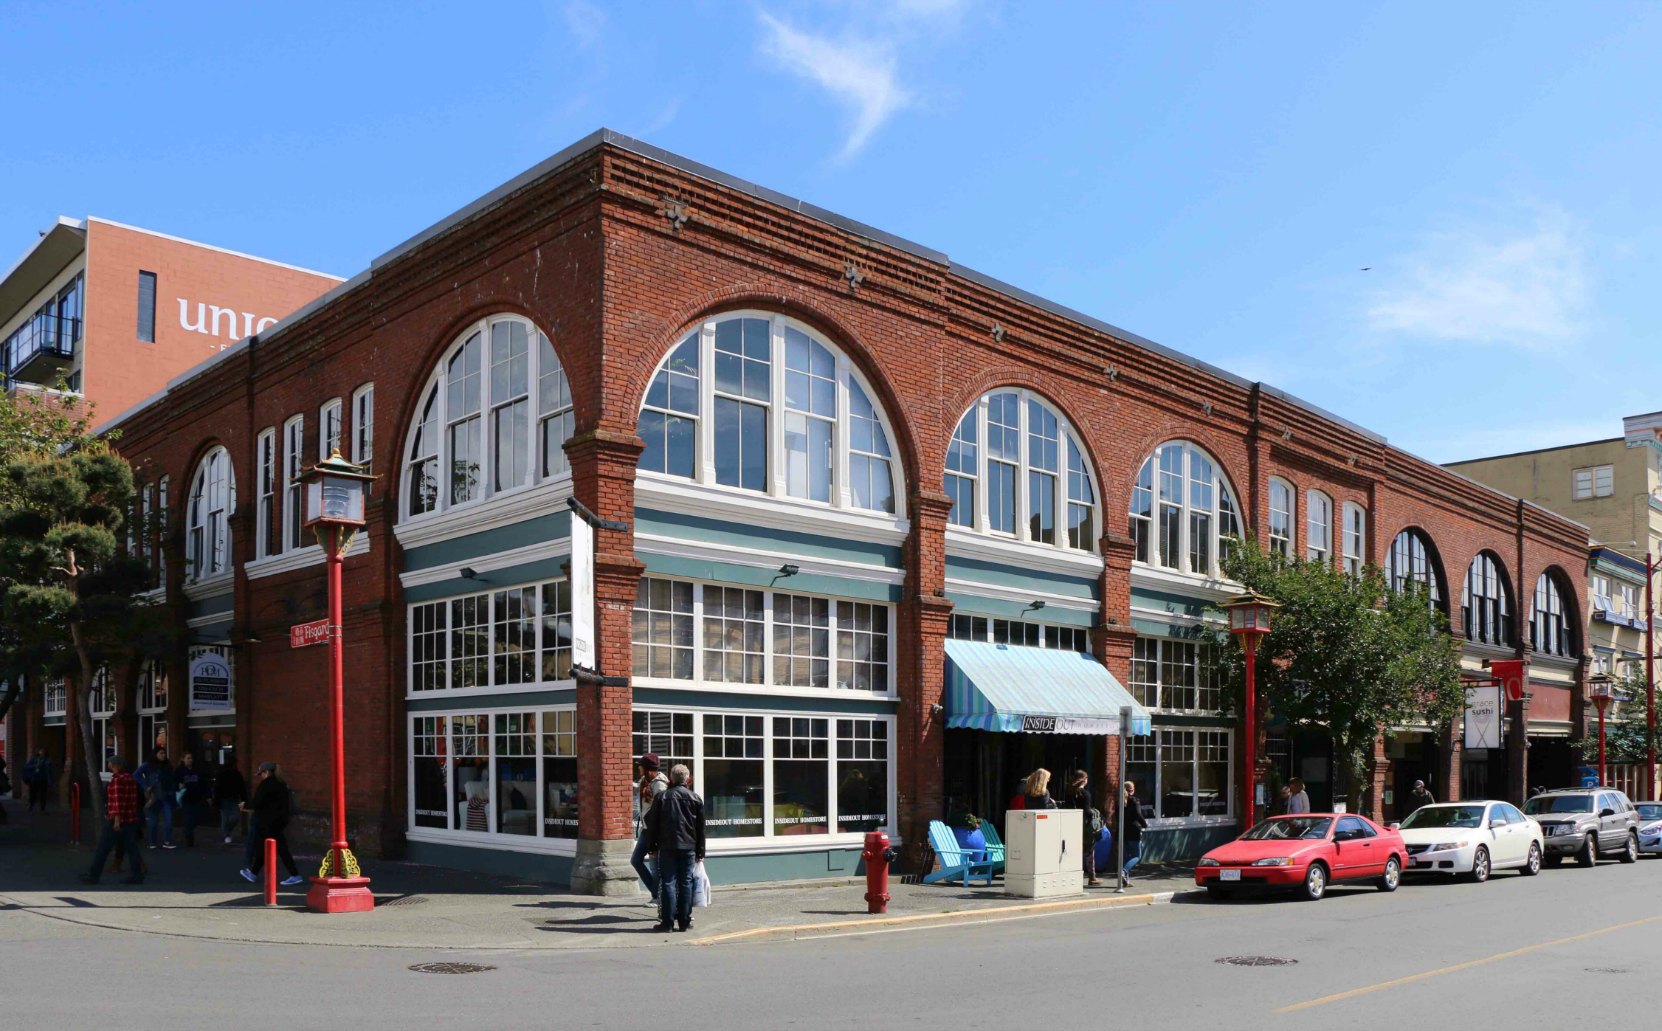 505 Fisgard Street / 1619-1627 Store Street, built in 1898 by architect Thomas Hooper (photo by Victoria Online Sightseeing Tours)